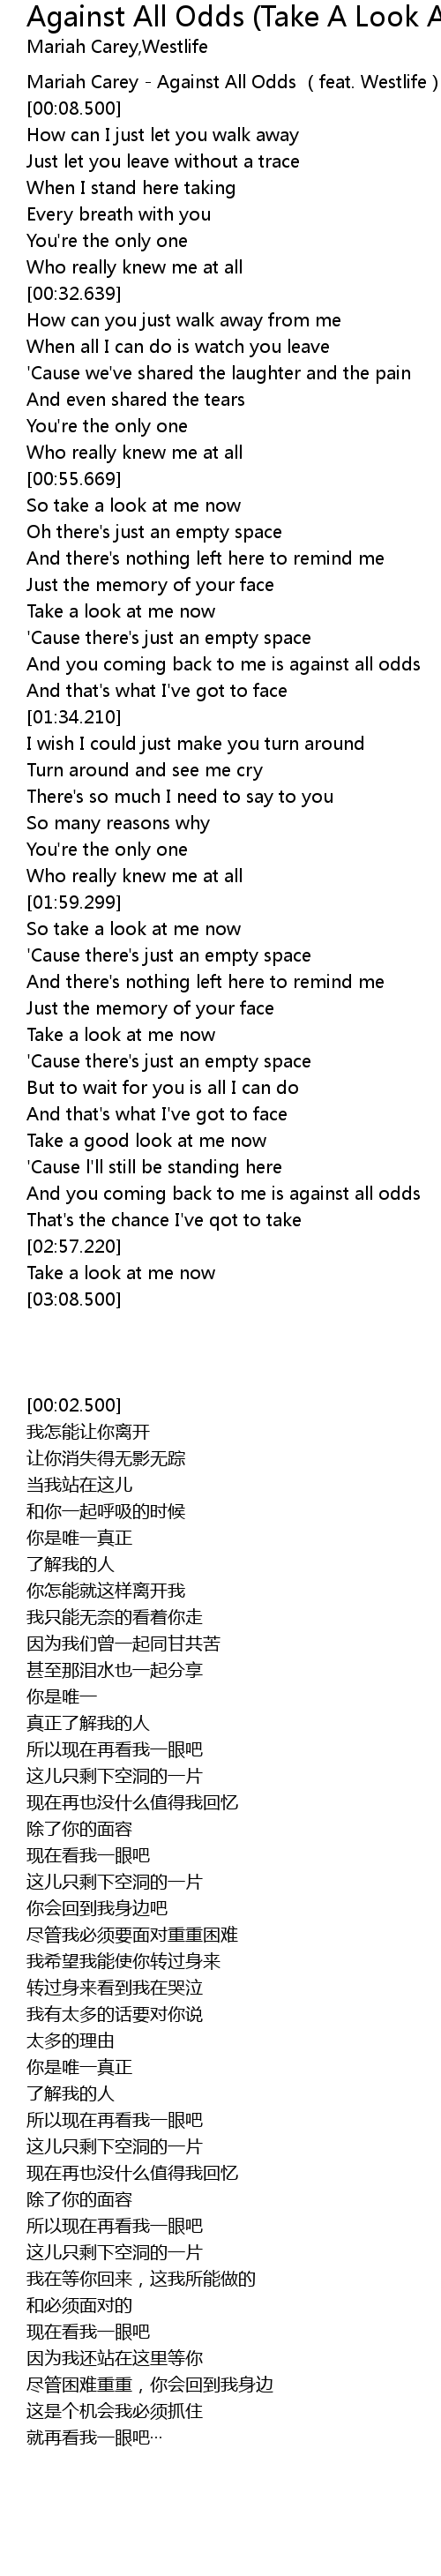 Against All Odds Take A Look At Me Now Album Version Featuring Westlife Lyrics Follow Lyrics